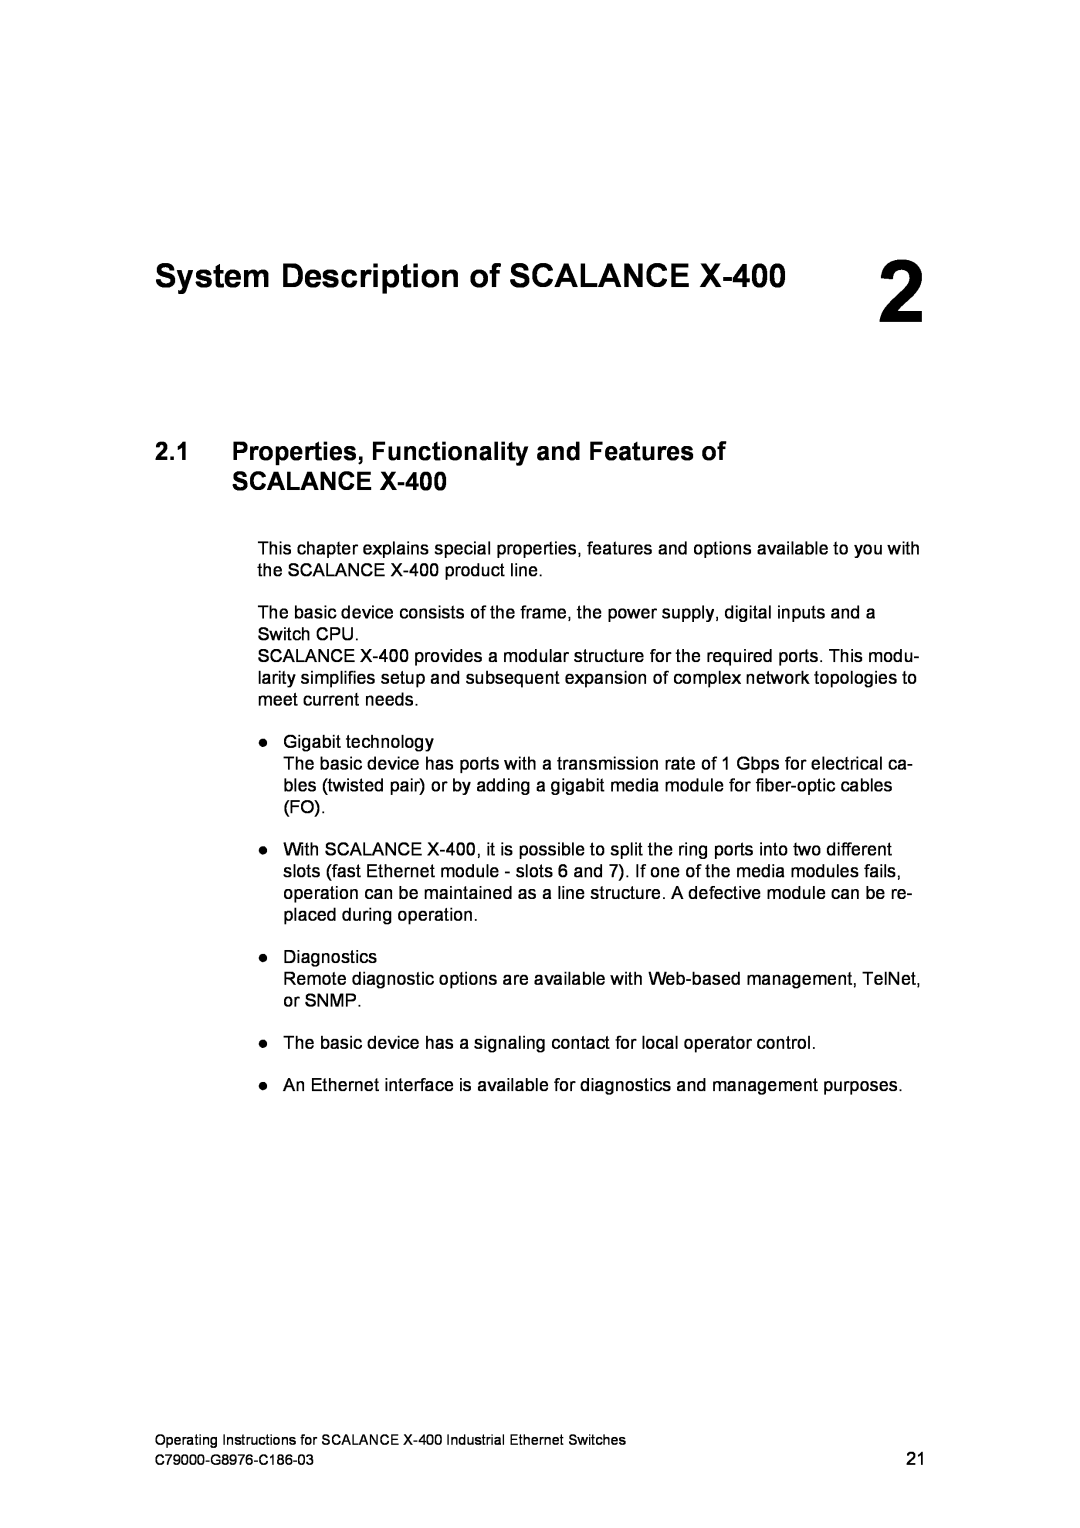 Siemens X-400 technical specifications System Description of SCALANCE, Properties, Functionality and Features of SCALANCE 